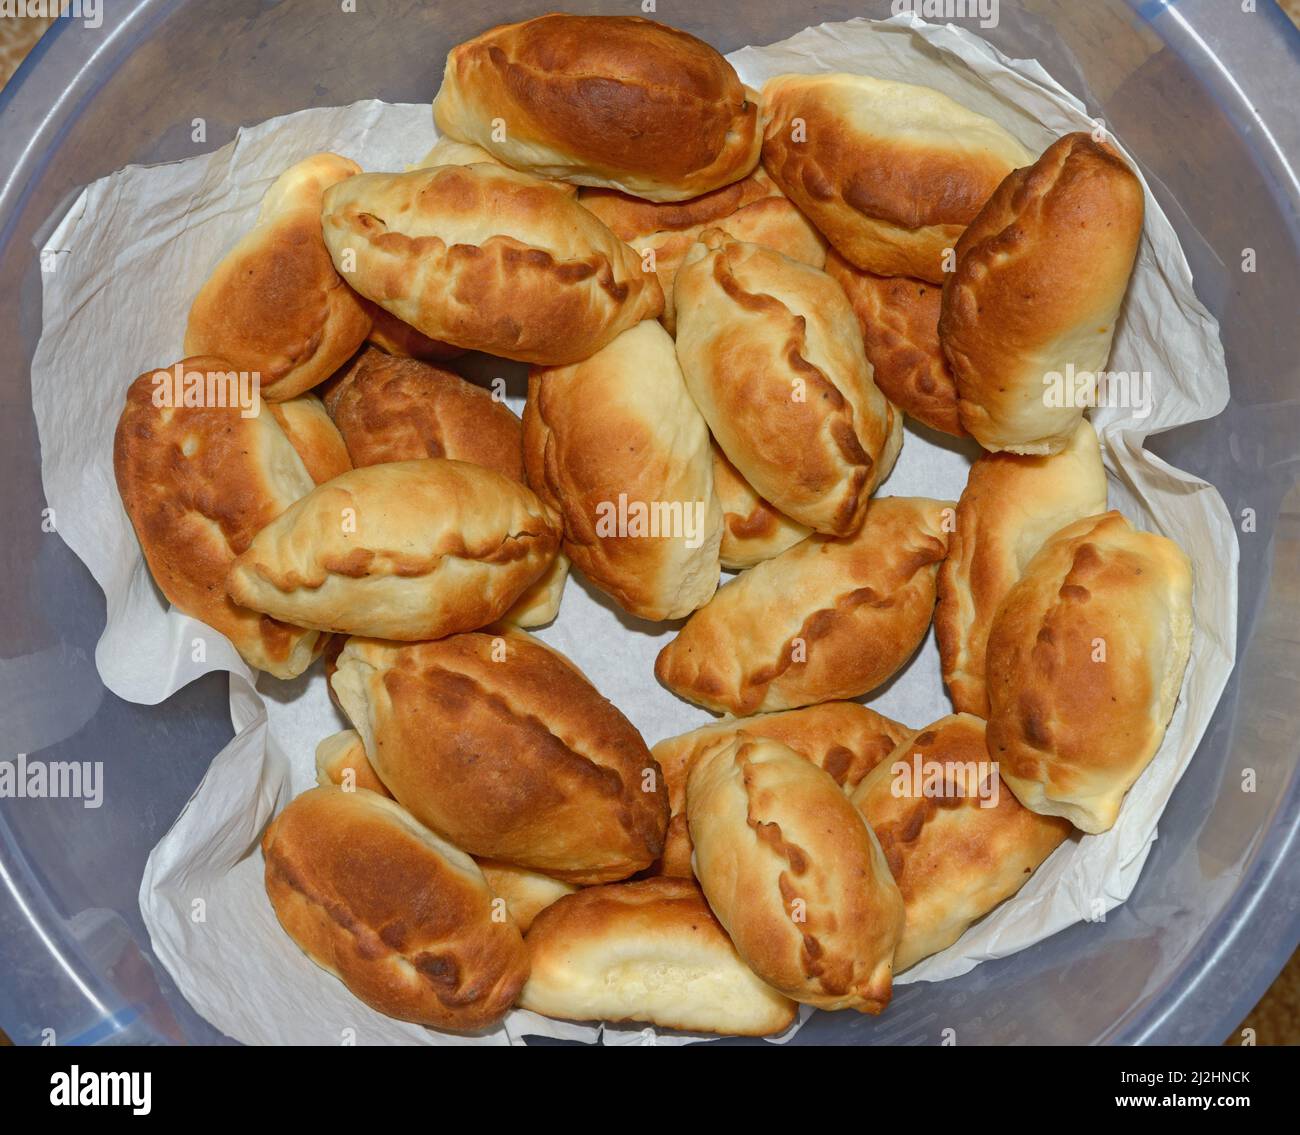 Many traditional Russian baked patties on paper in deep blue plastic bowl. Stock Photo